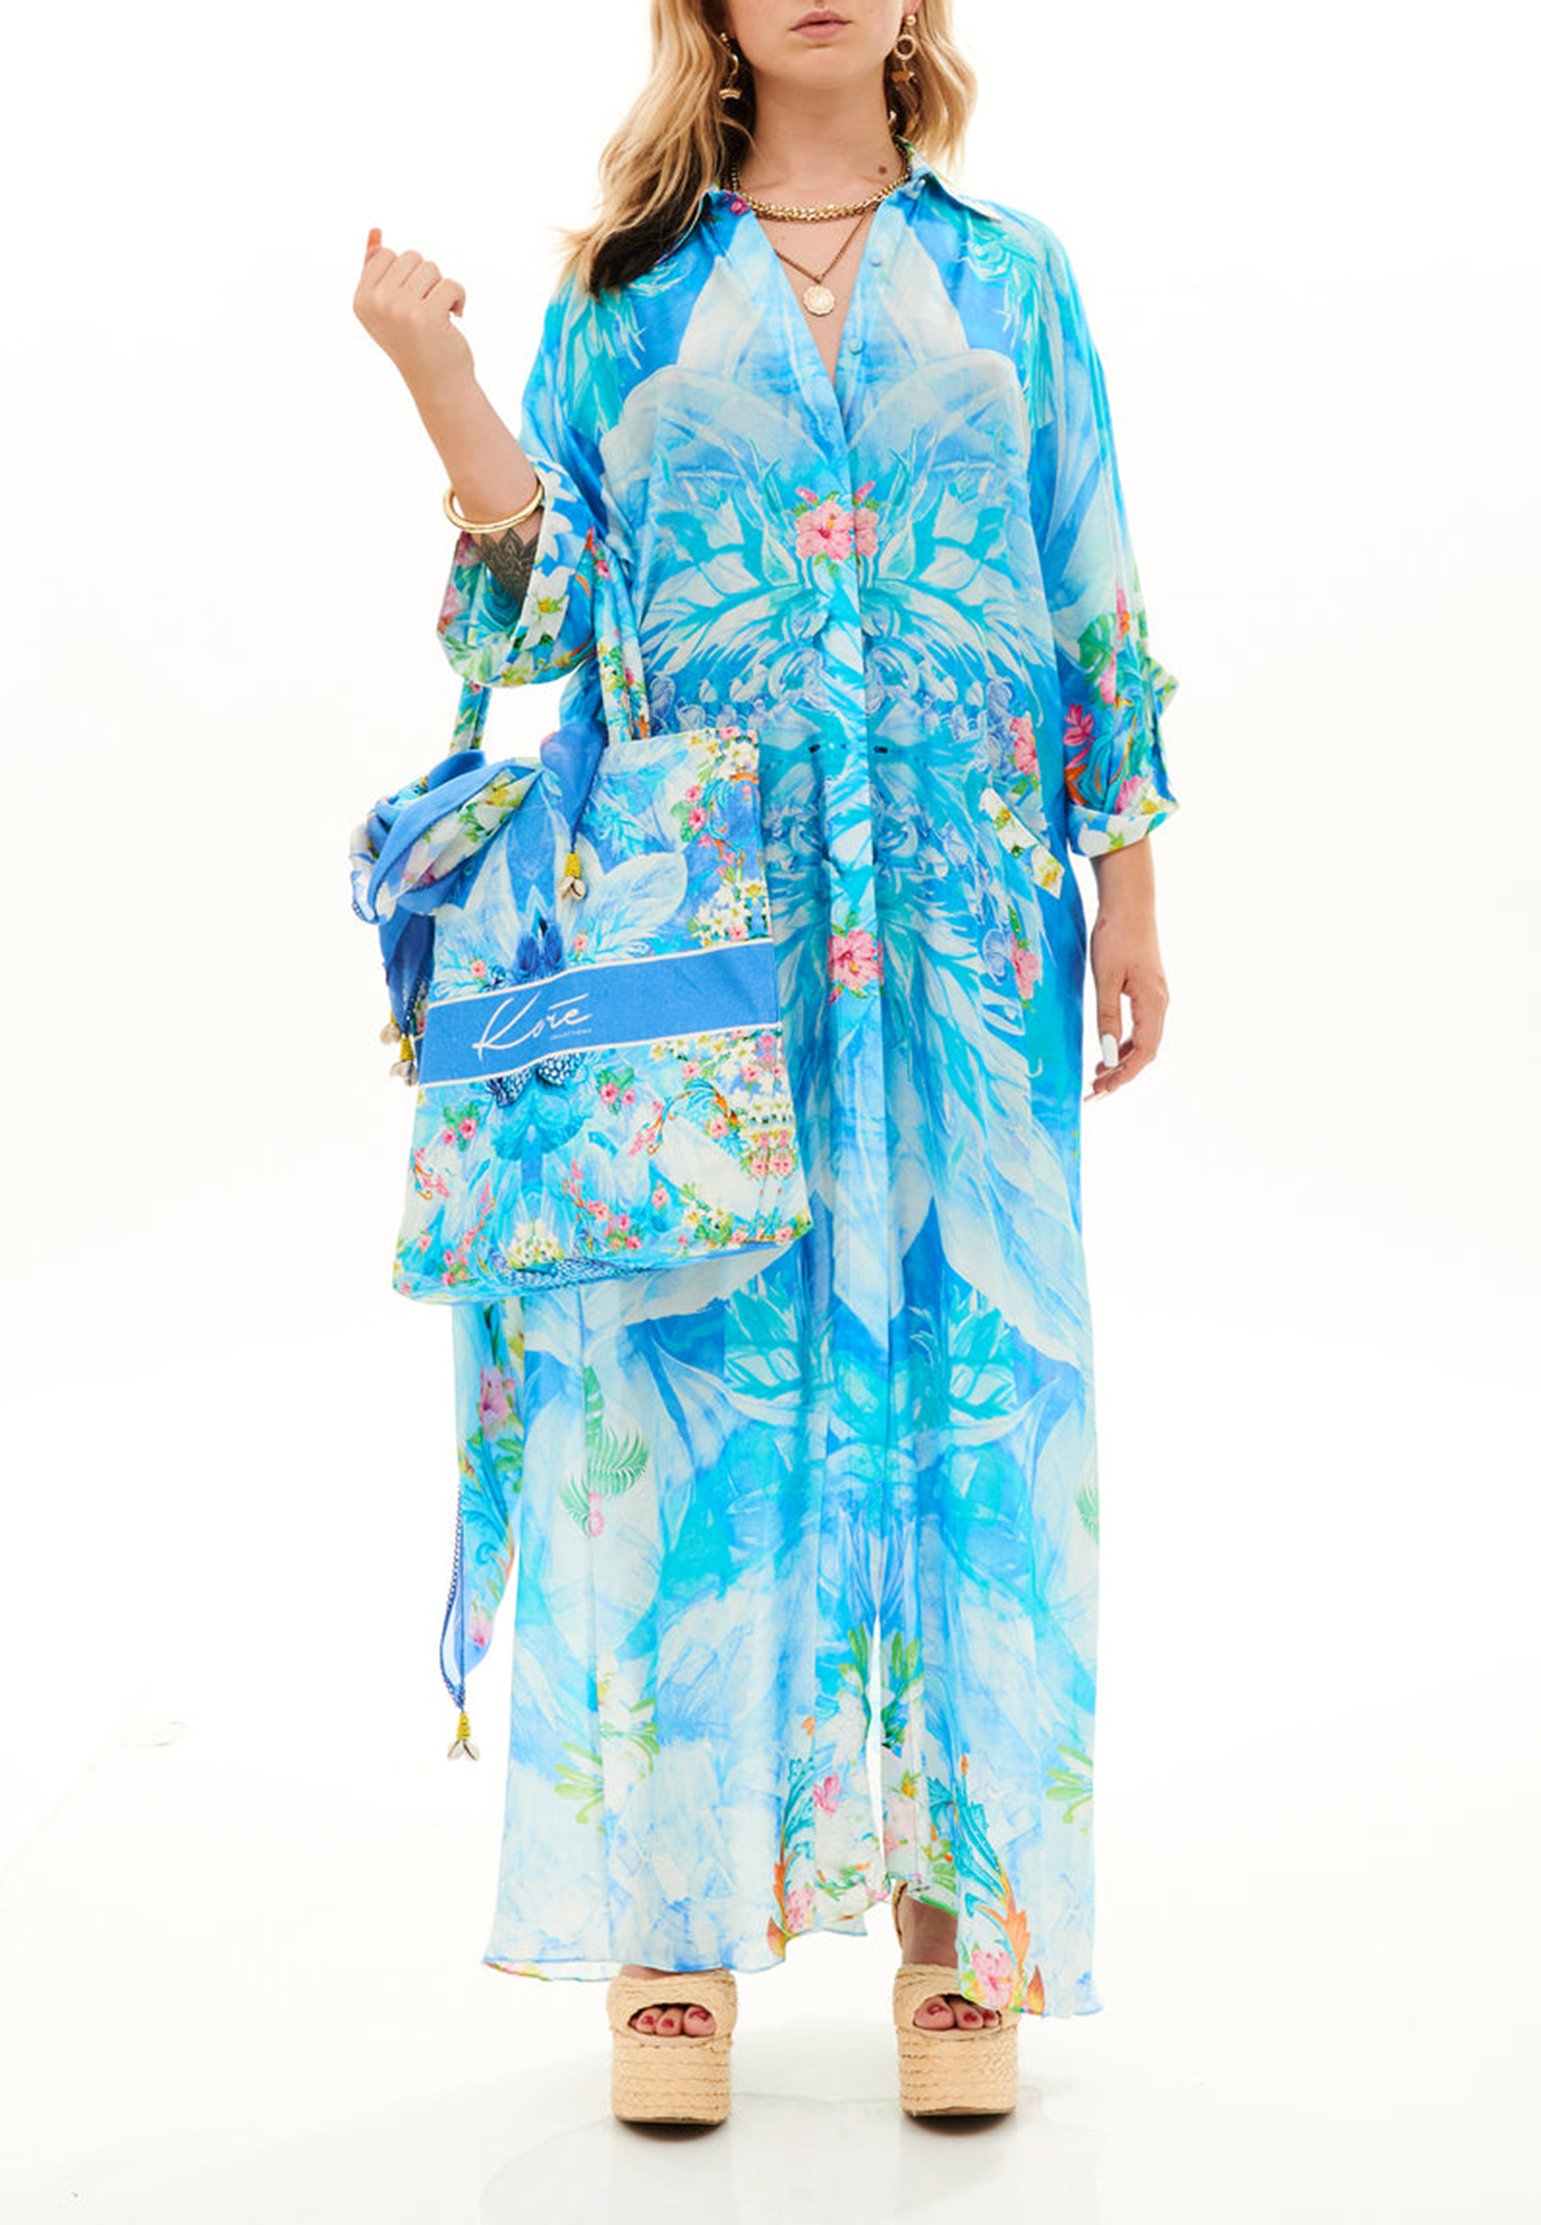 Dress KORE' COLLECTIONS Color: blue (Code: 2309) in online store Allure